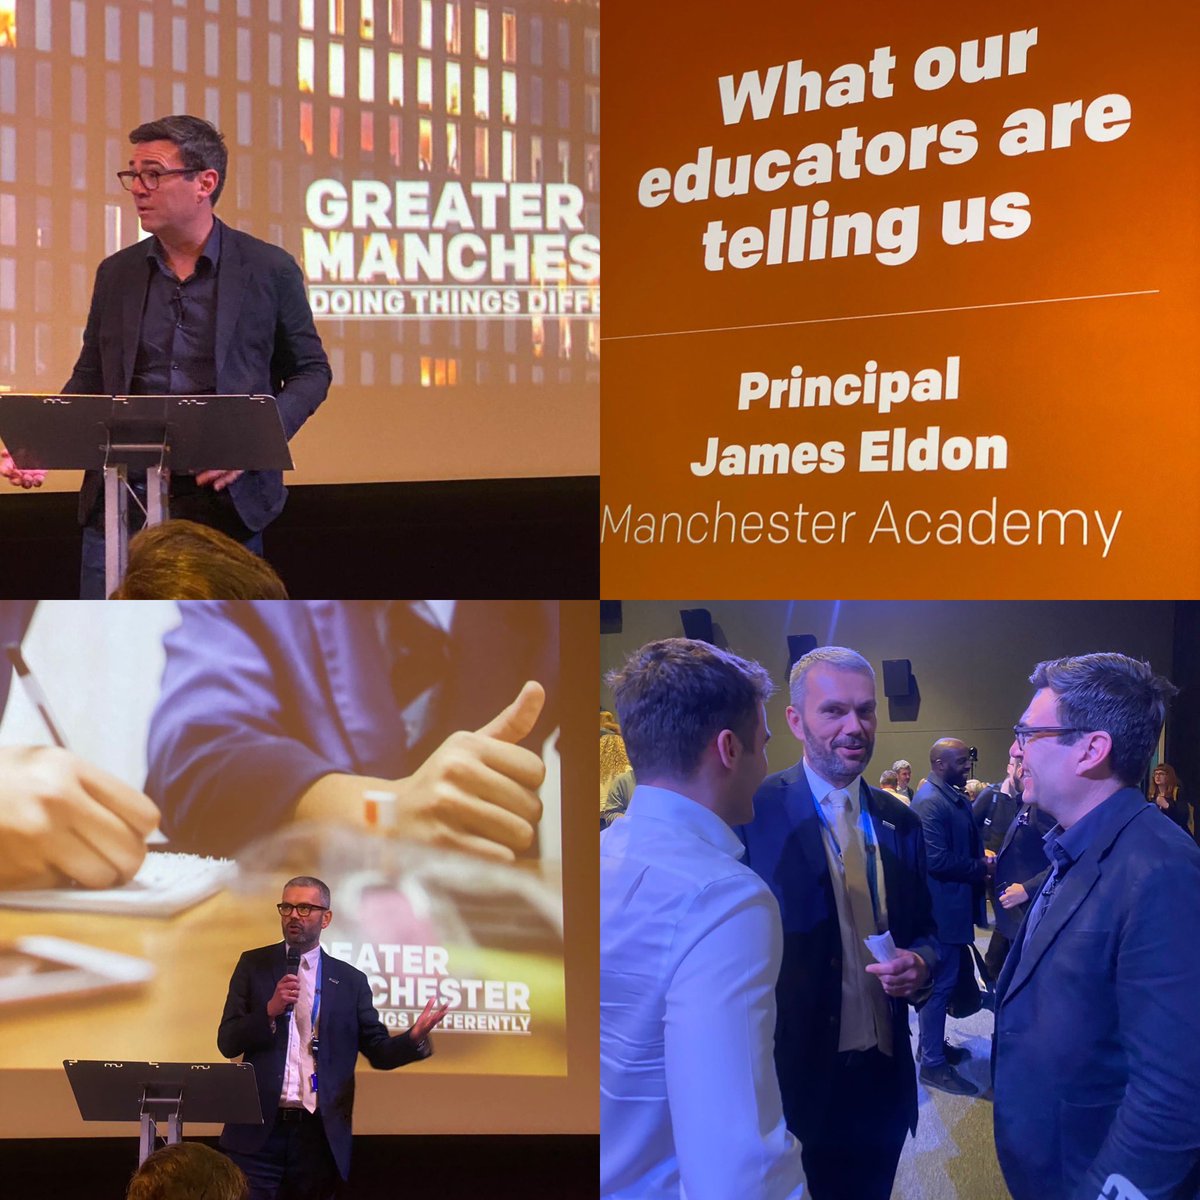 Changing the opportunities for Greater Manchester’s young people and narrating what the city needs for technical education to thrive and be valued. Real leadership from @AndyBurnhamGM and proud to be part of the conversation. MBacc is a huge opportunity for our students.